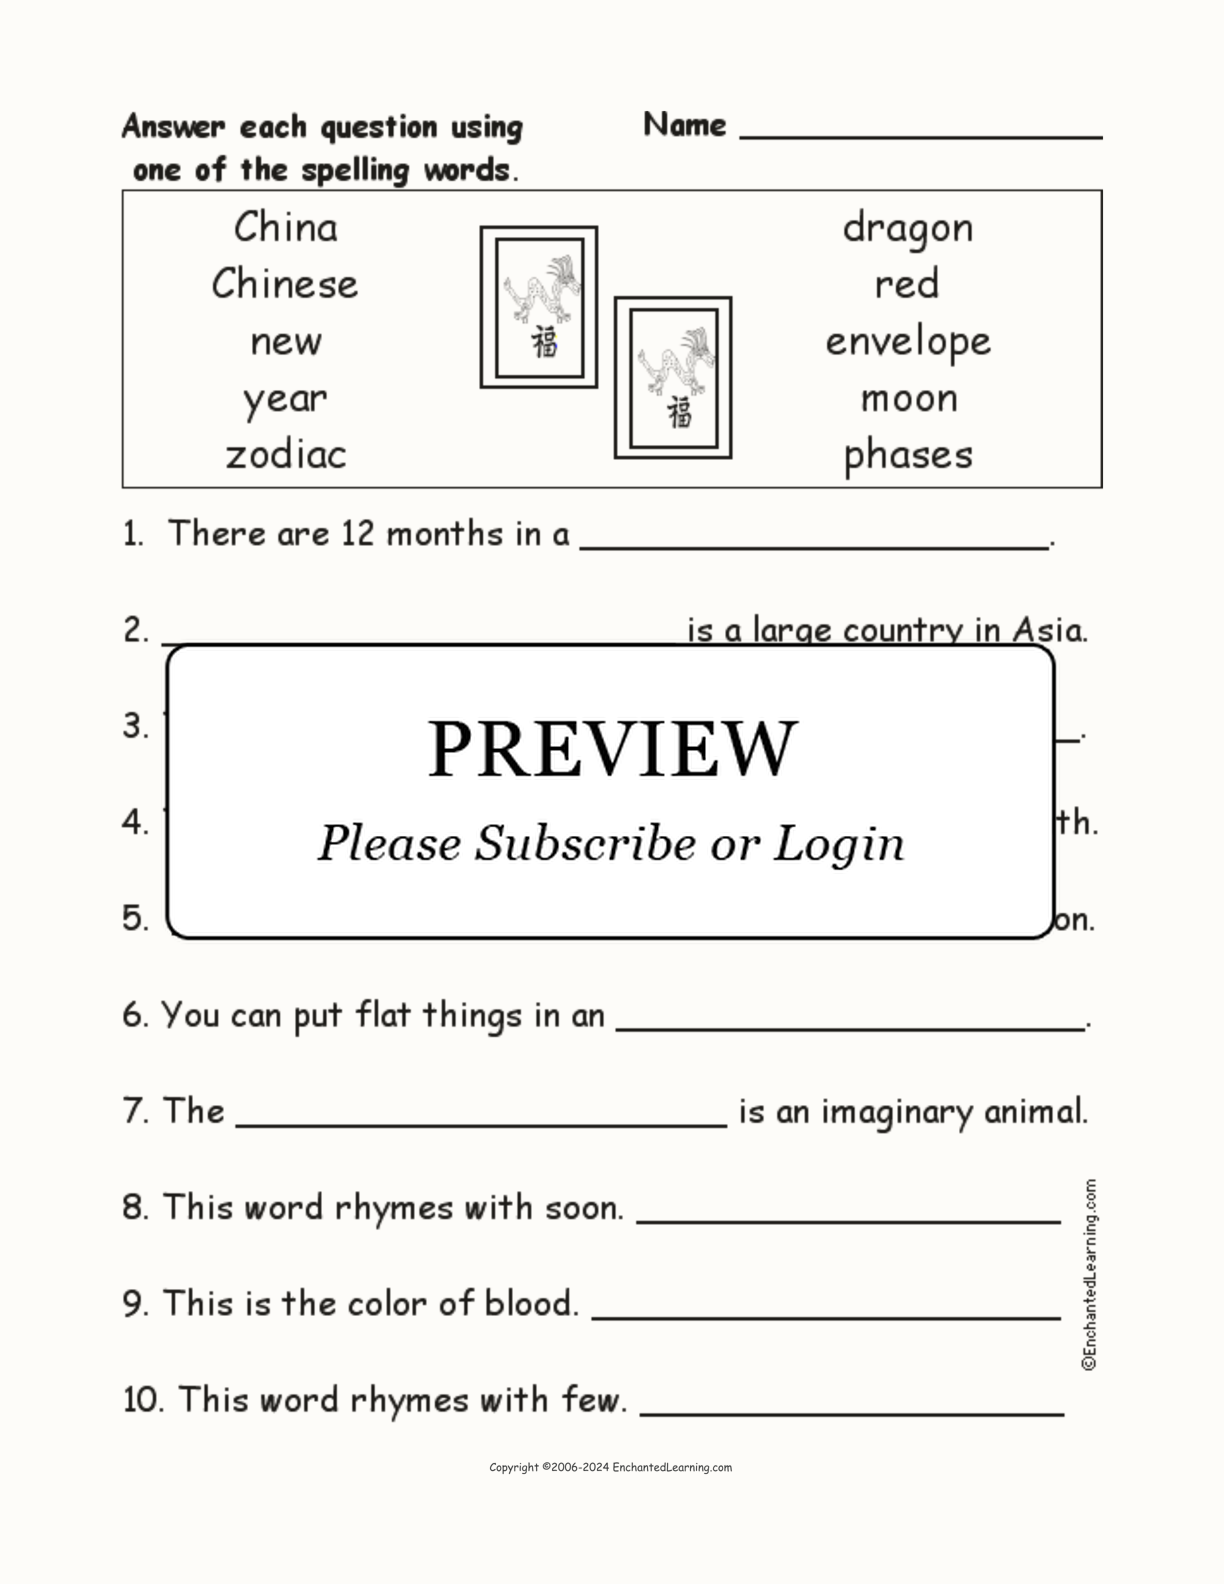 Chinese New Year: Spelling Word Questions interactive worksheet page 1